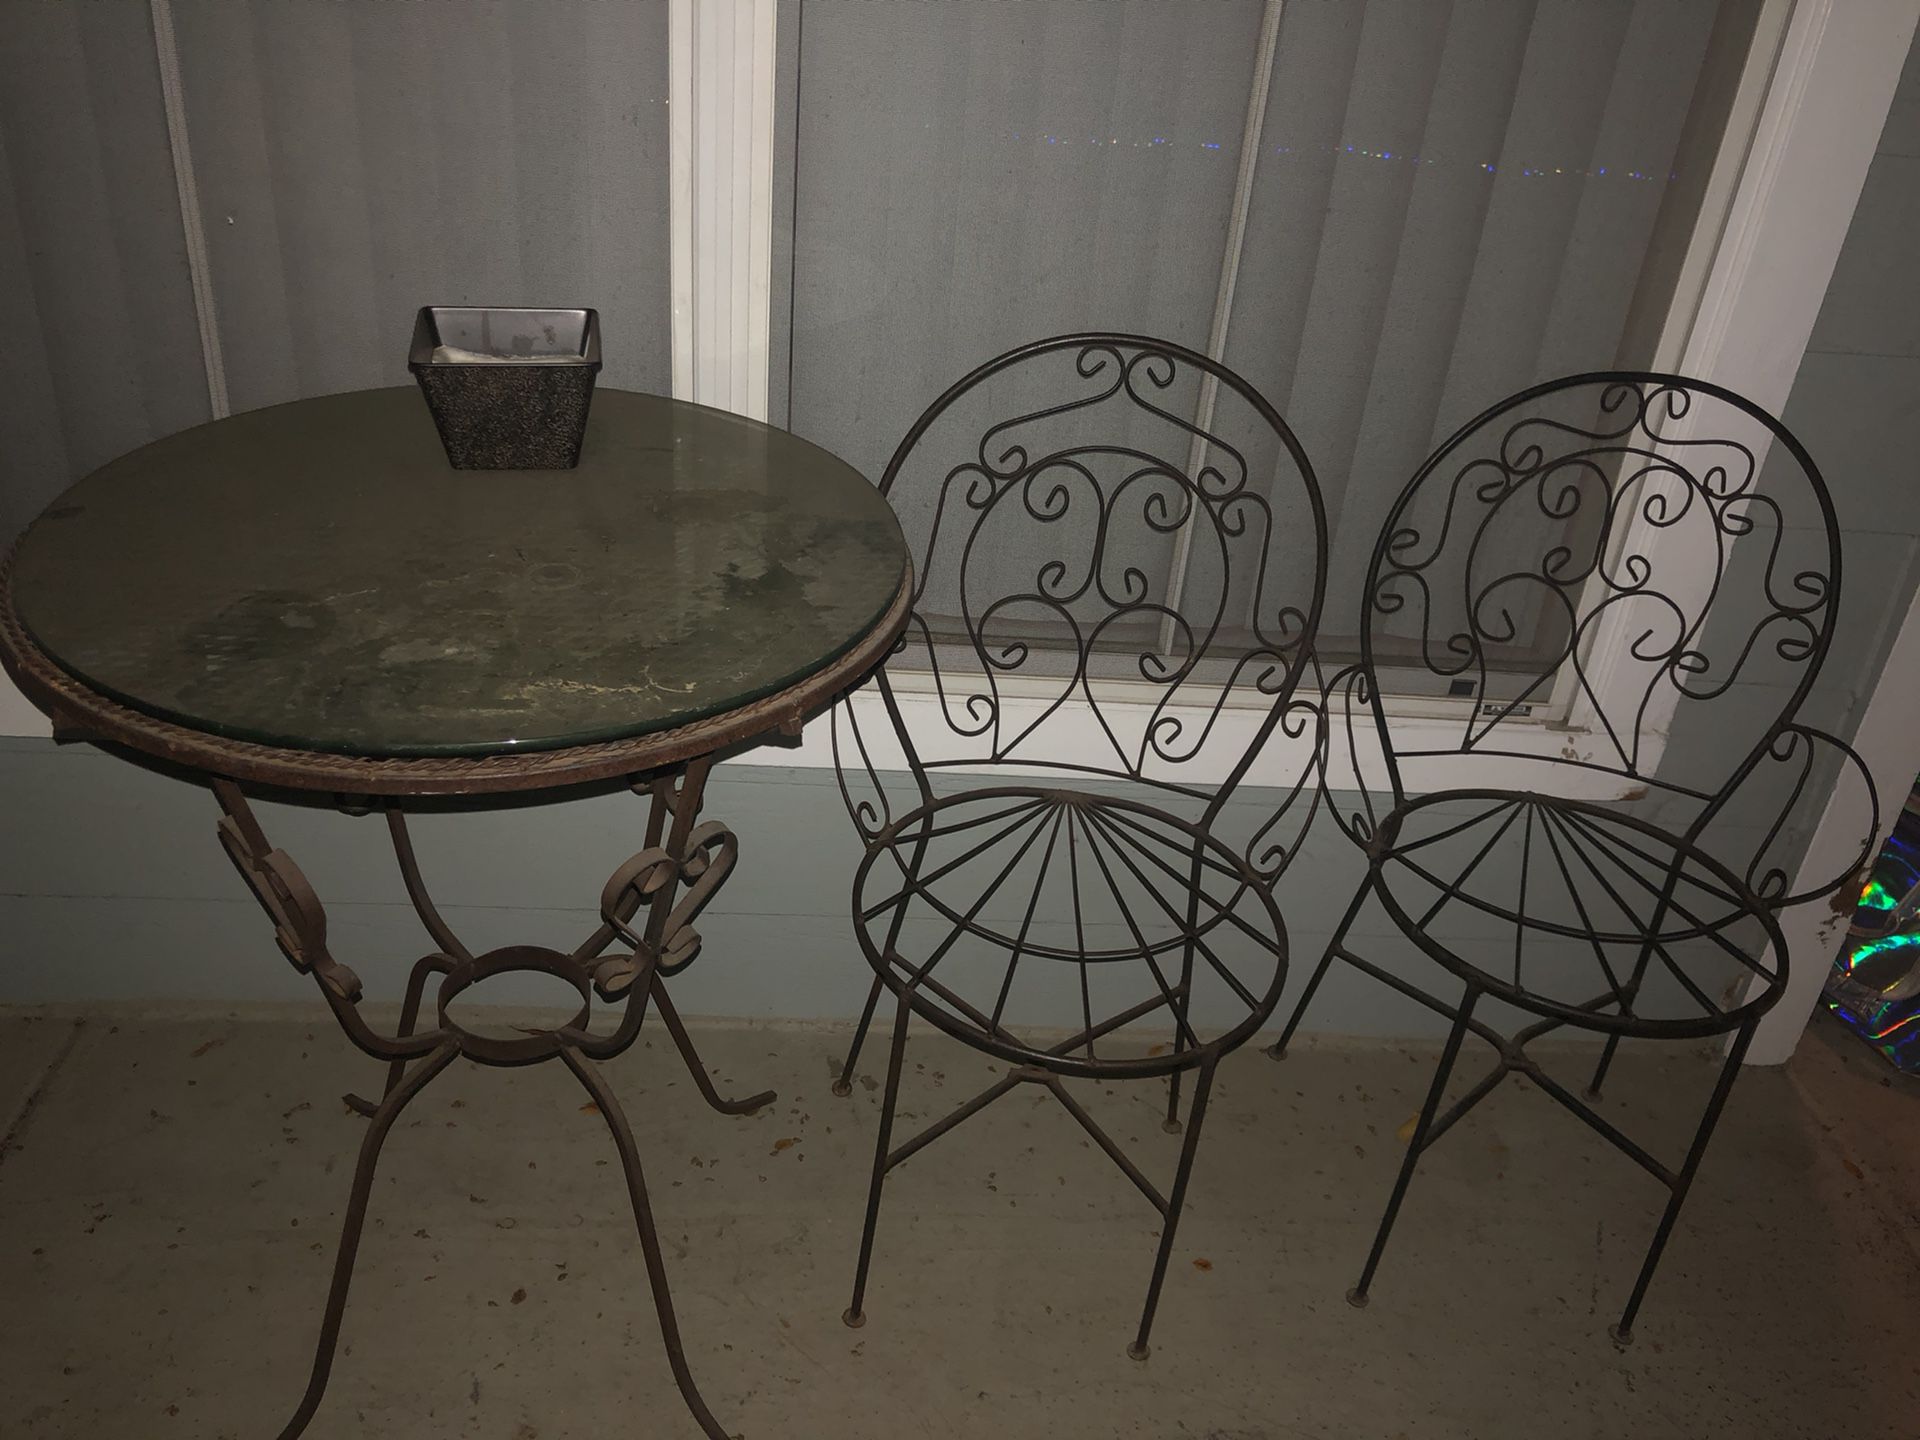 Patio Table/chairs